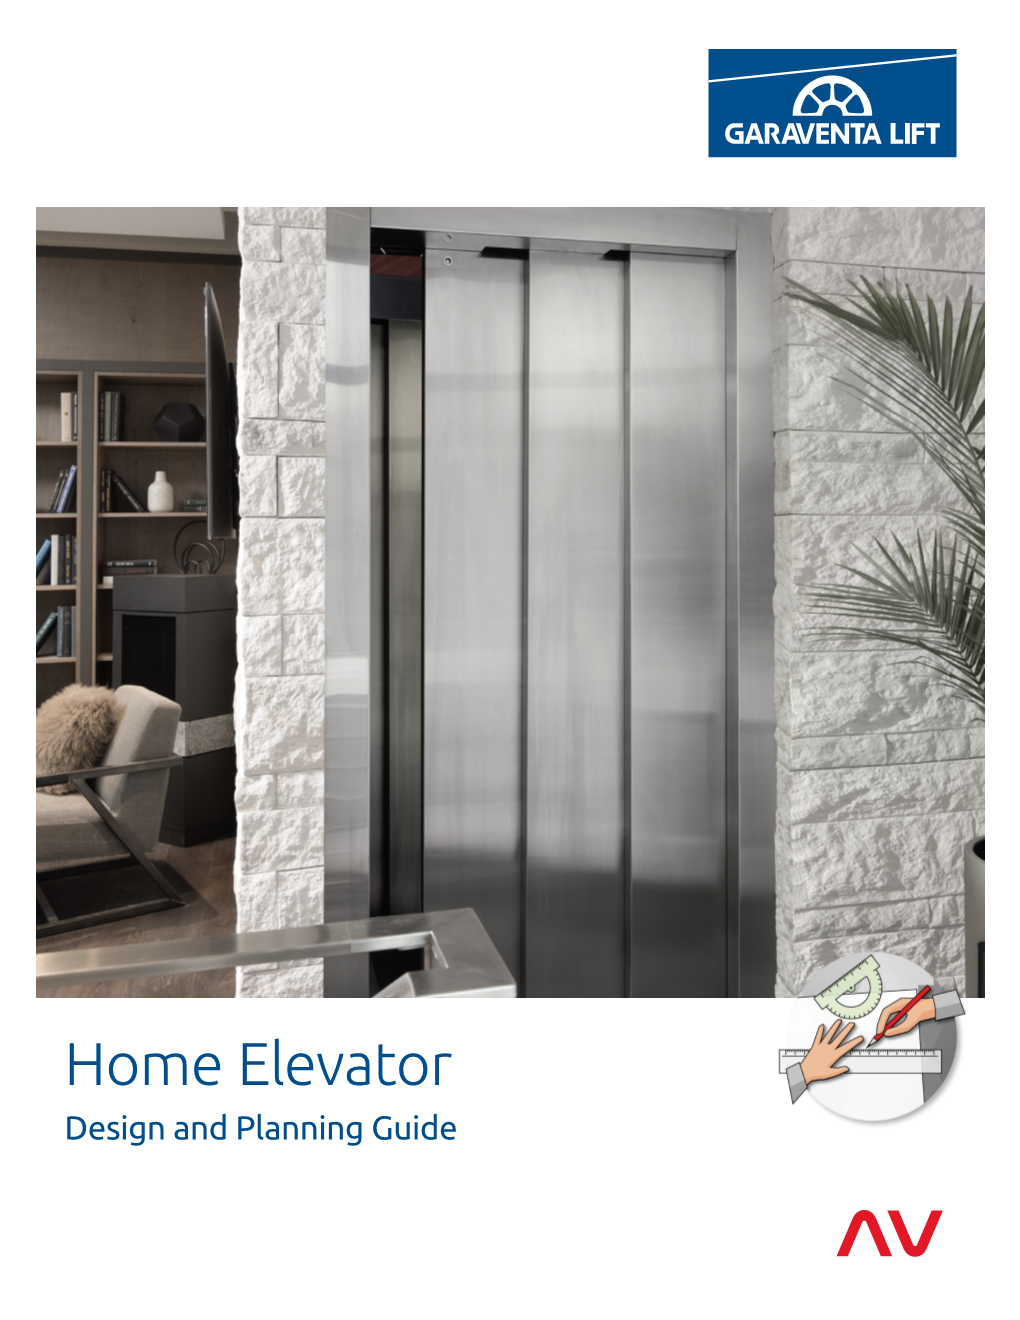 Home Elevator Design and Planning Guide Please Note